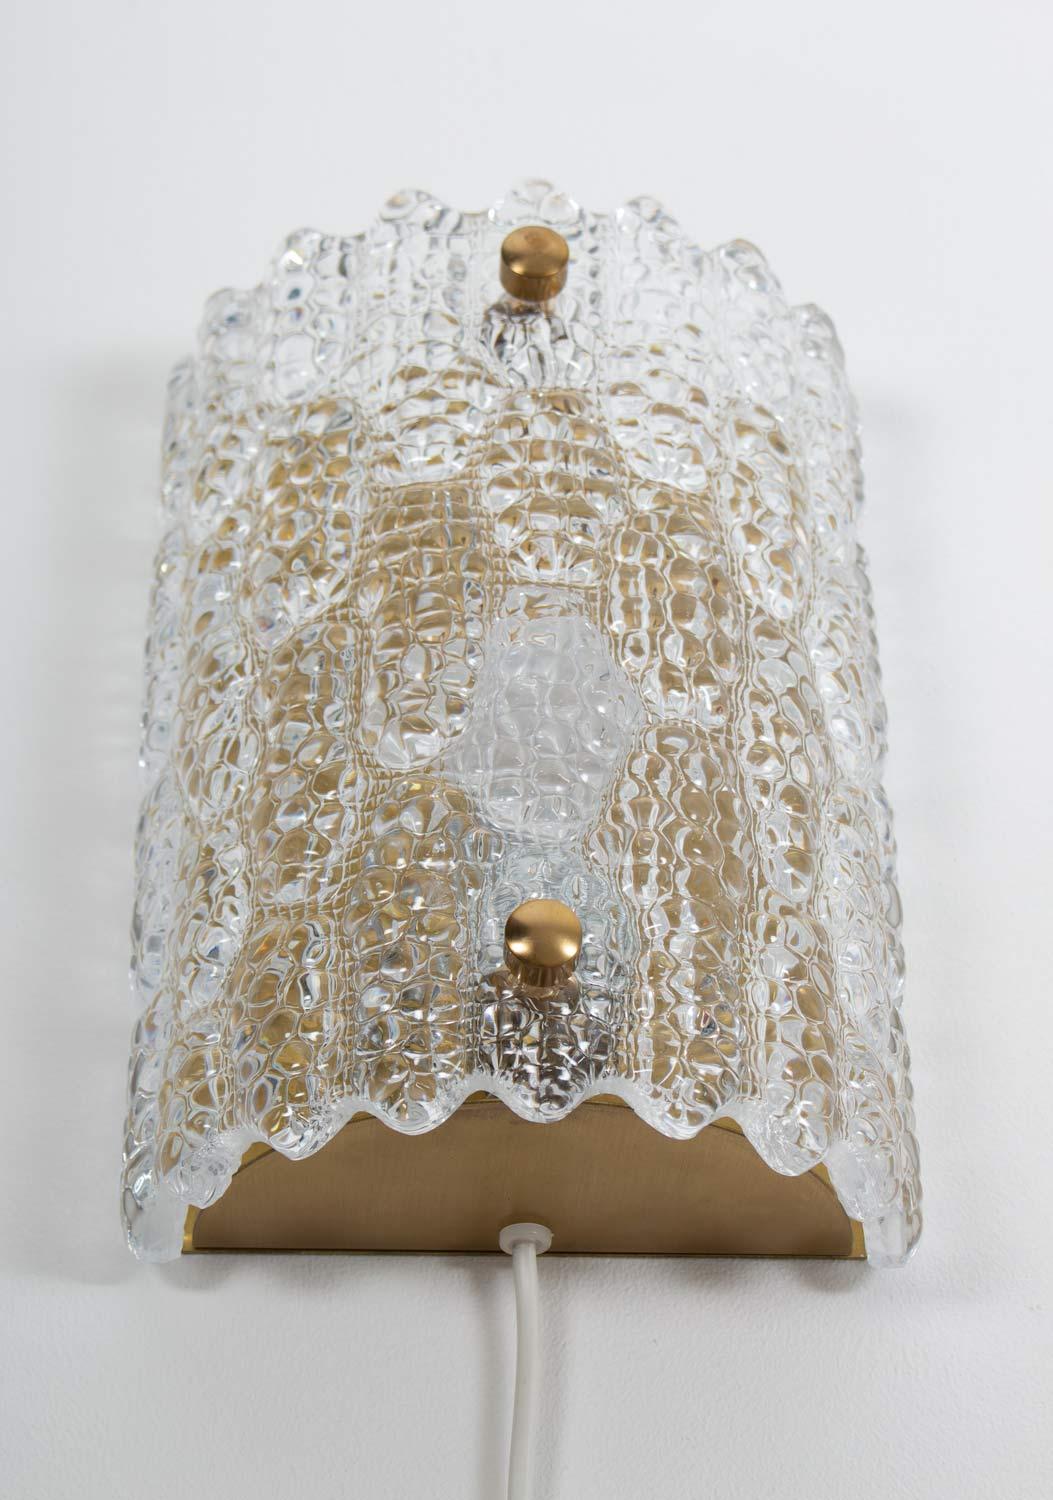 Beautiful wall lamps by Carl Fagerlund for Orrefors, Sweden.
The lamps consist of a crystal glass block fixture on a brass bottom.
5 pieces available.
Condition: Very good original condition.